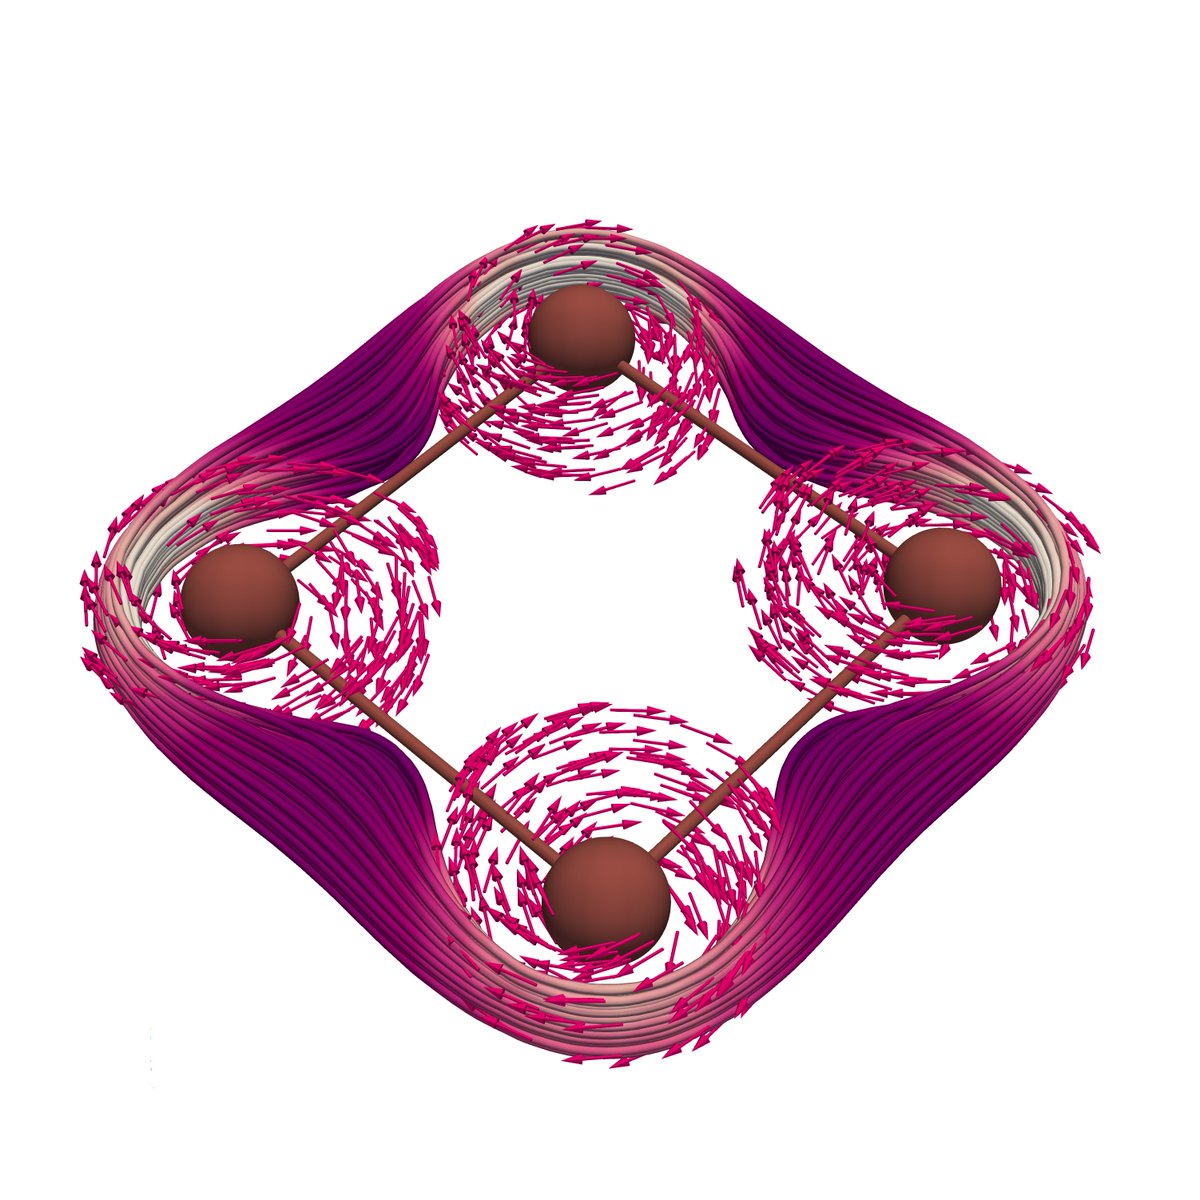 Determining the aromaticity of molecules with heavy elements is never trivial, especially from a magnetic viewpoint due to the core electrons. Check out our preprint on this topic on @ChemRxiv! doi.org/10.26434/chemr… A work with @eduardmatito @theochemmerida @KumpulaScience